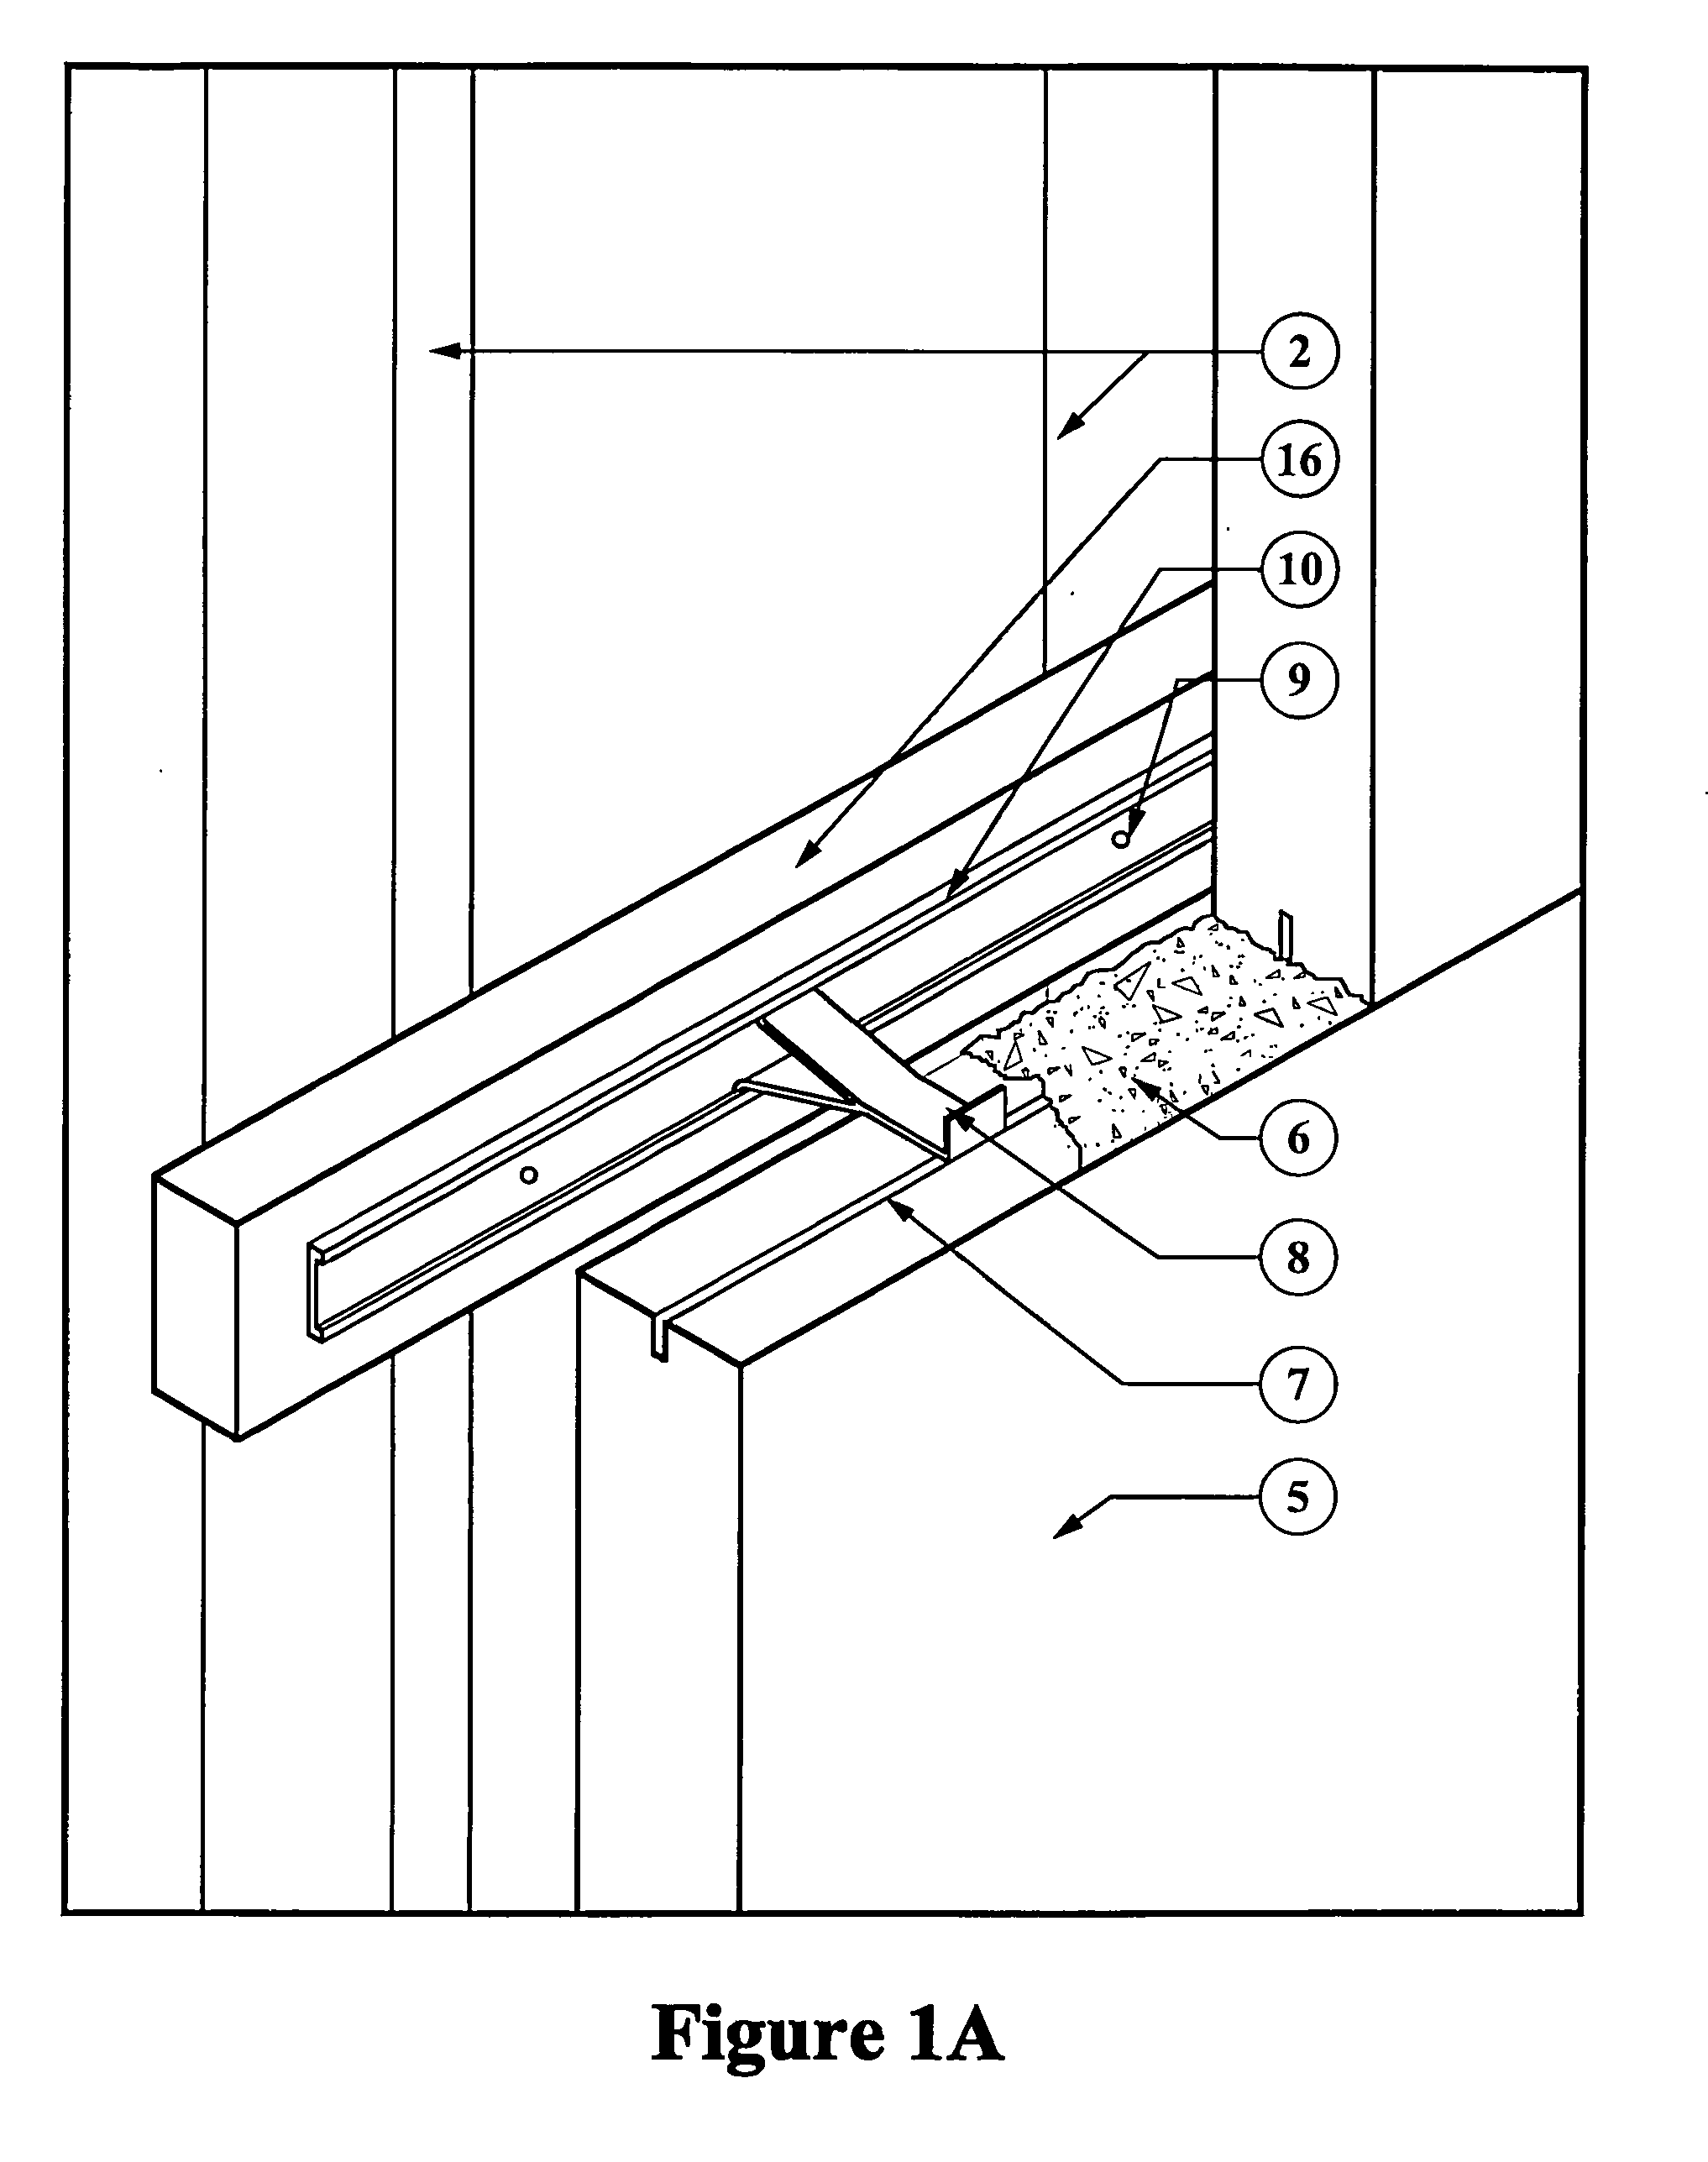 Wall construction method using injected urethane foam between the wall and autoclaved concrete (AAC) blocks